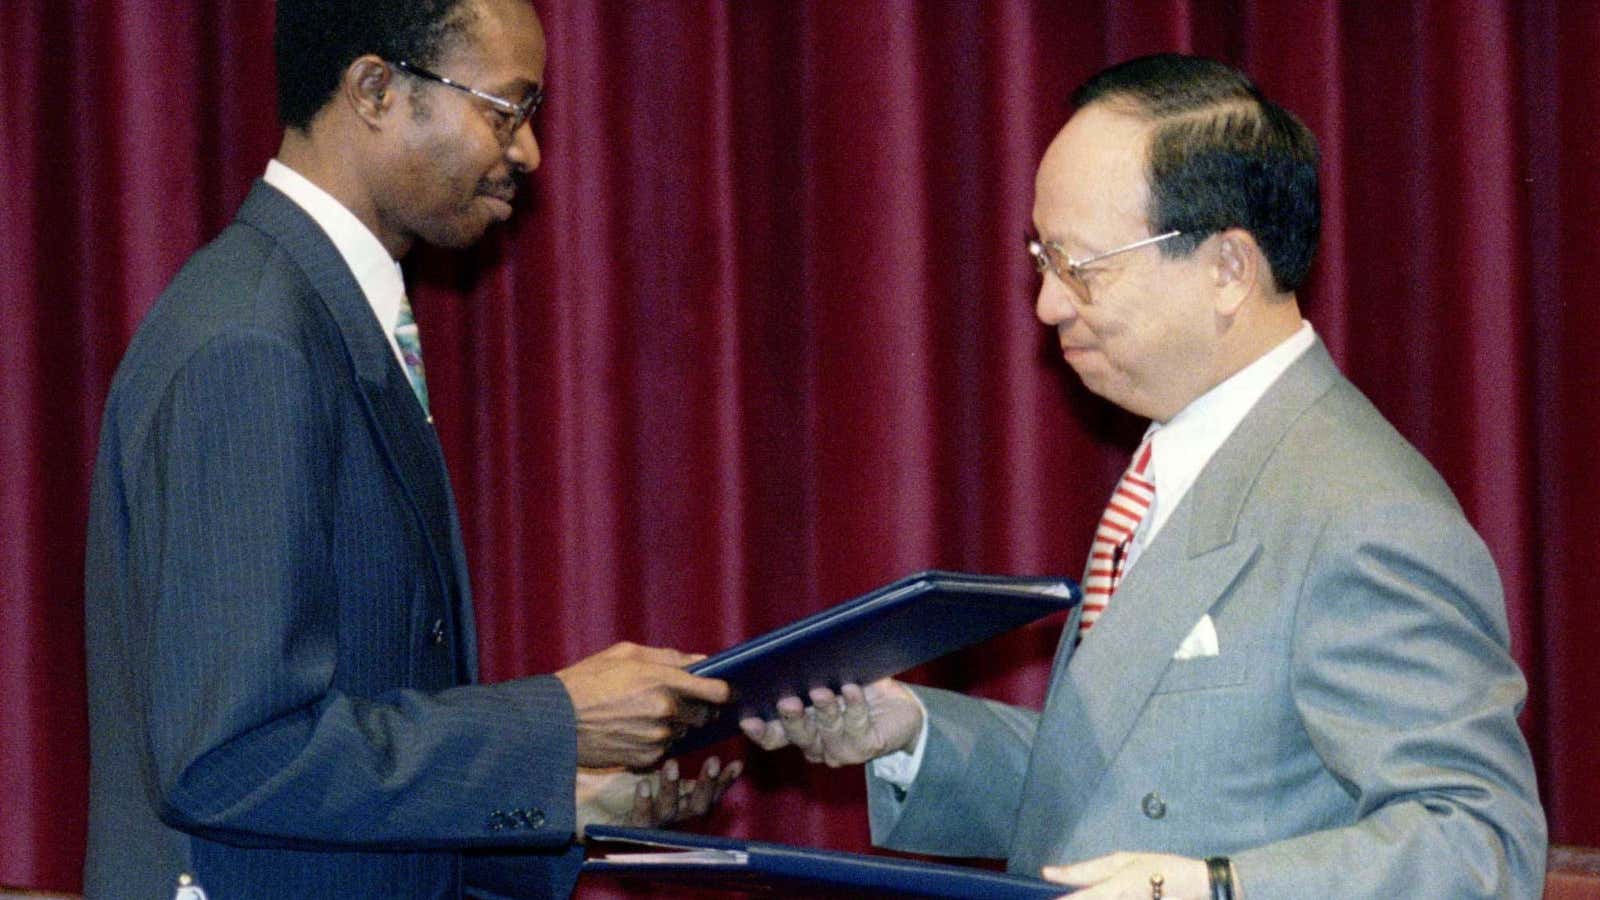 Taiwan’s foreign minister John Chang and his Sao Tome counterpart M. Homero Salvaterra declared the establishment of diplomatic relations between the two sides in 1997.